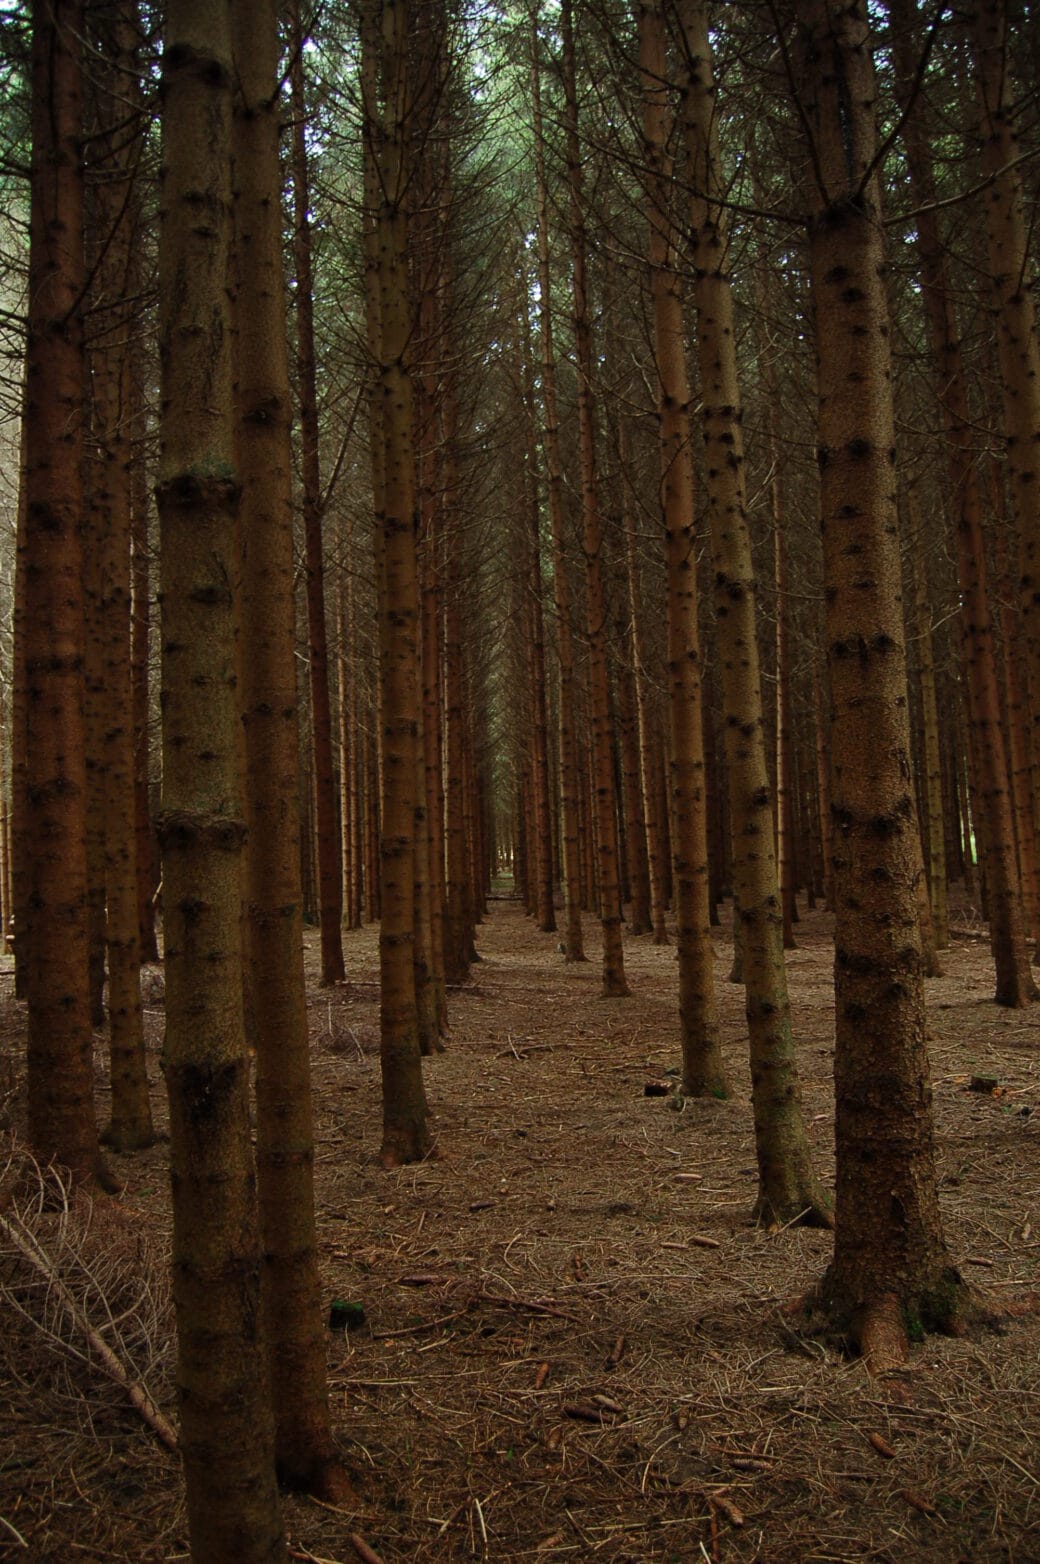 Picture: The photo shows a spruce forest with straight rows of trees in the weak tree age class.